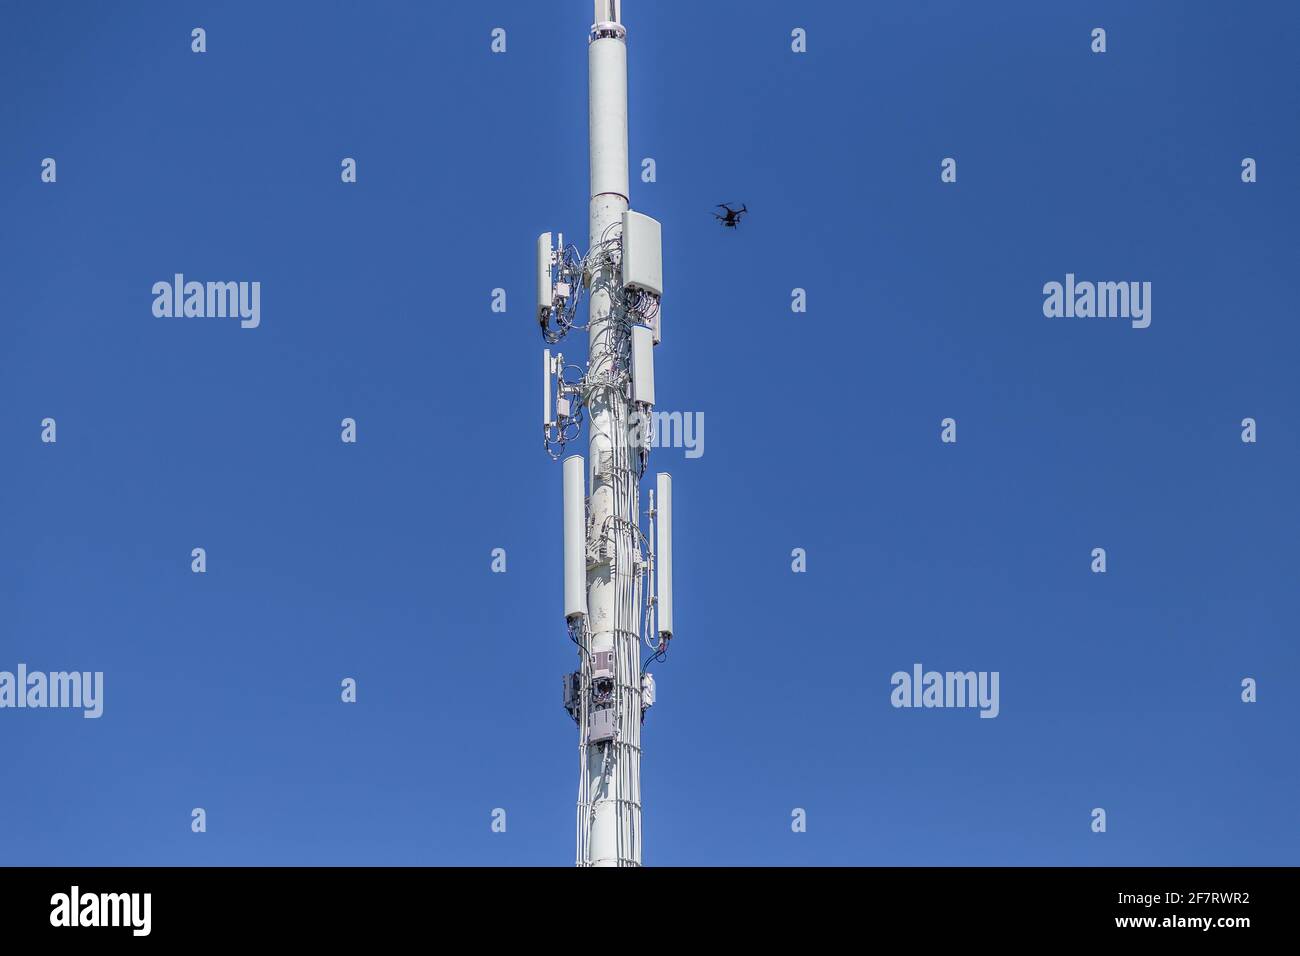 Drone Inspecting right top section of a cell tower Stock Photo